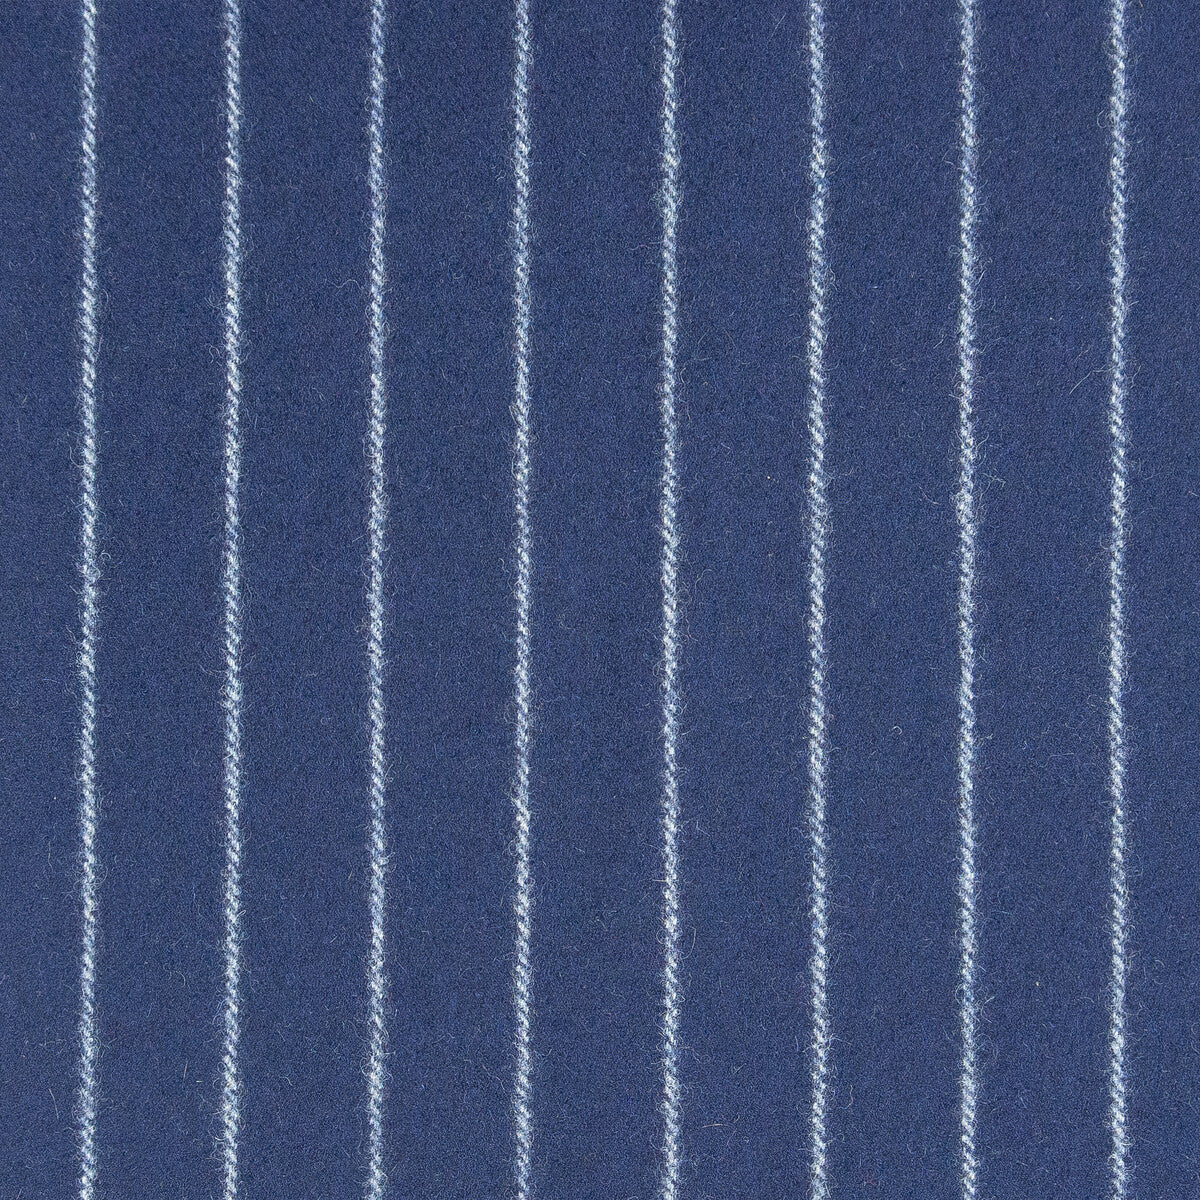 Aspen fabric in navy color - pattern GDT5583.001.0 - by Gaston y Daniela in the Gaston Luis Bustamante collection